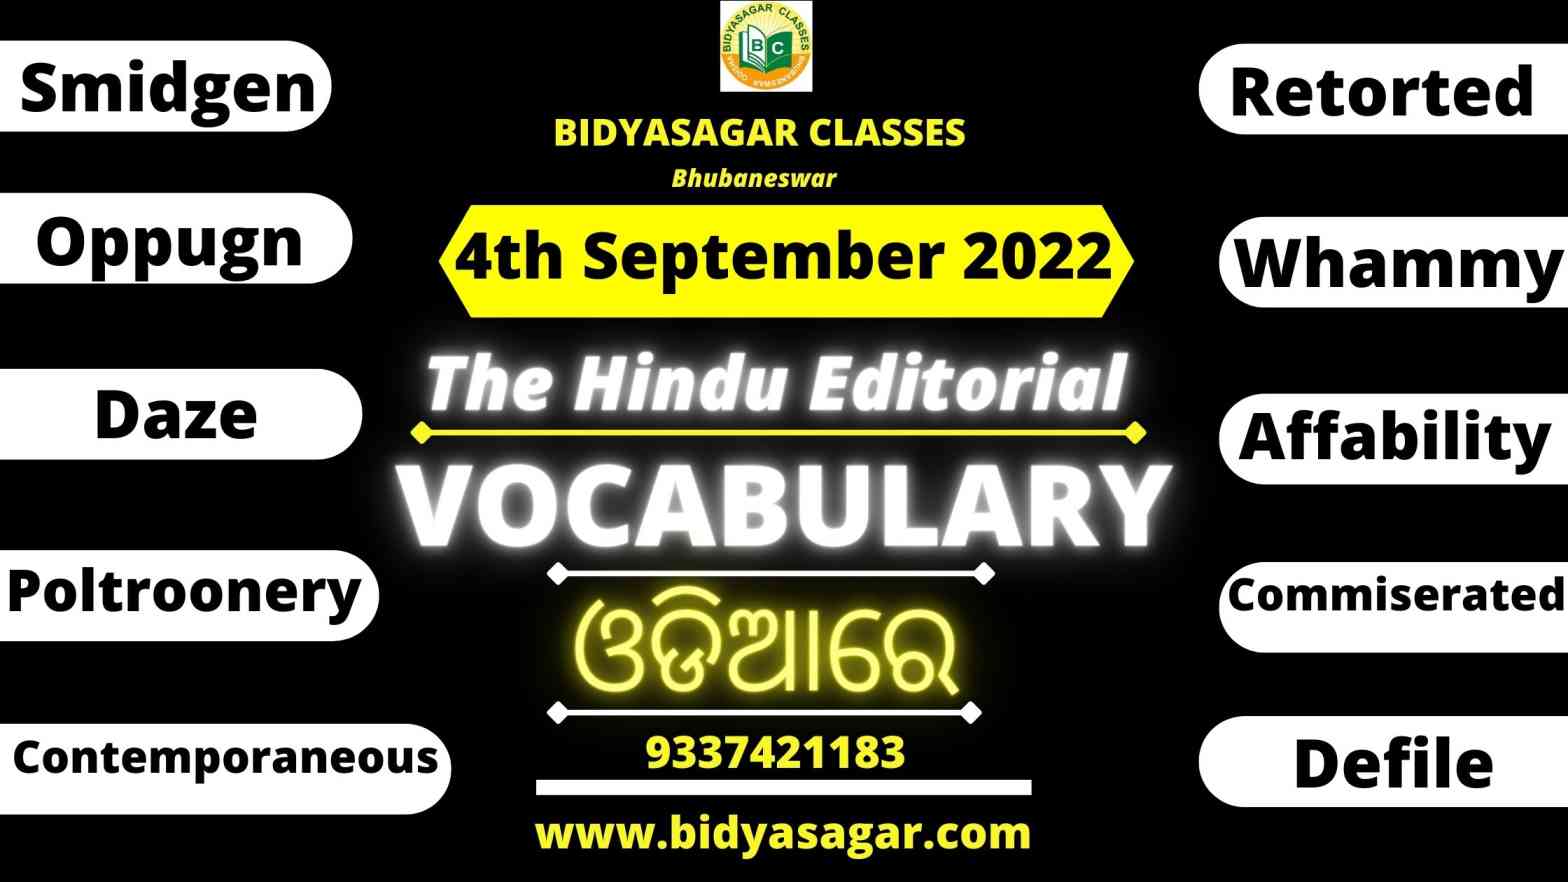 The Hindu Editorial Vocabulary of 4th September 2022